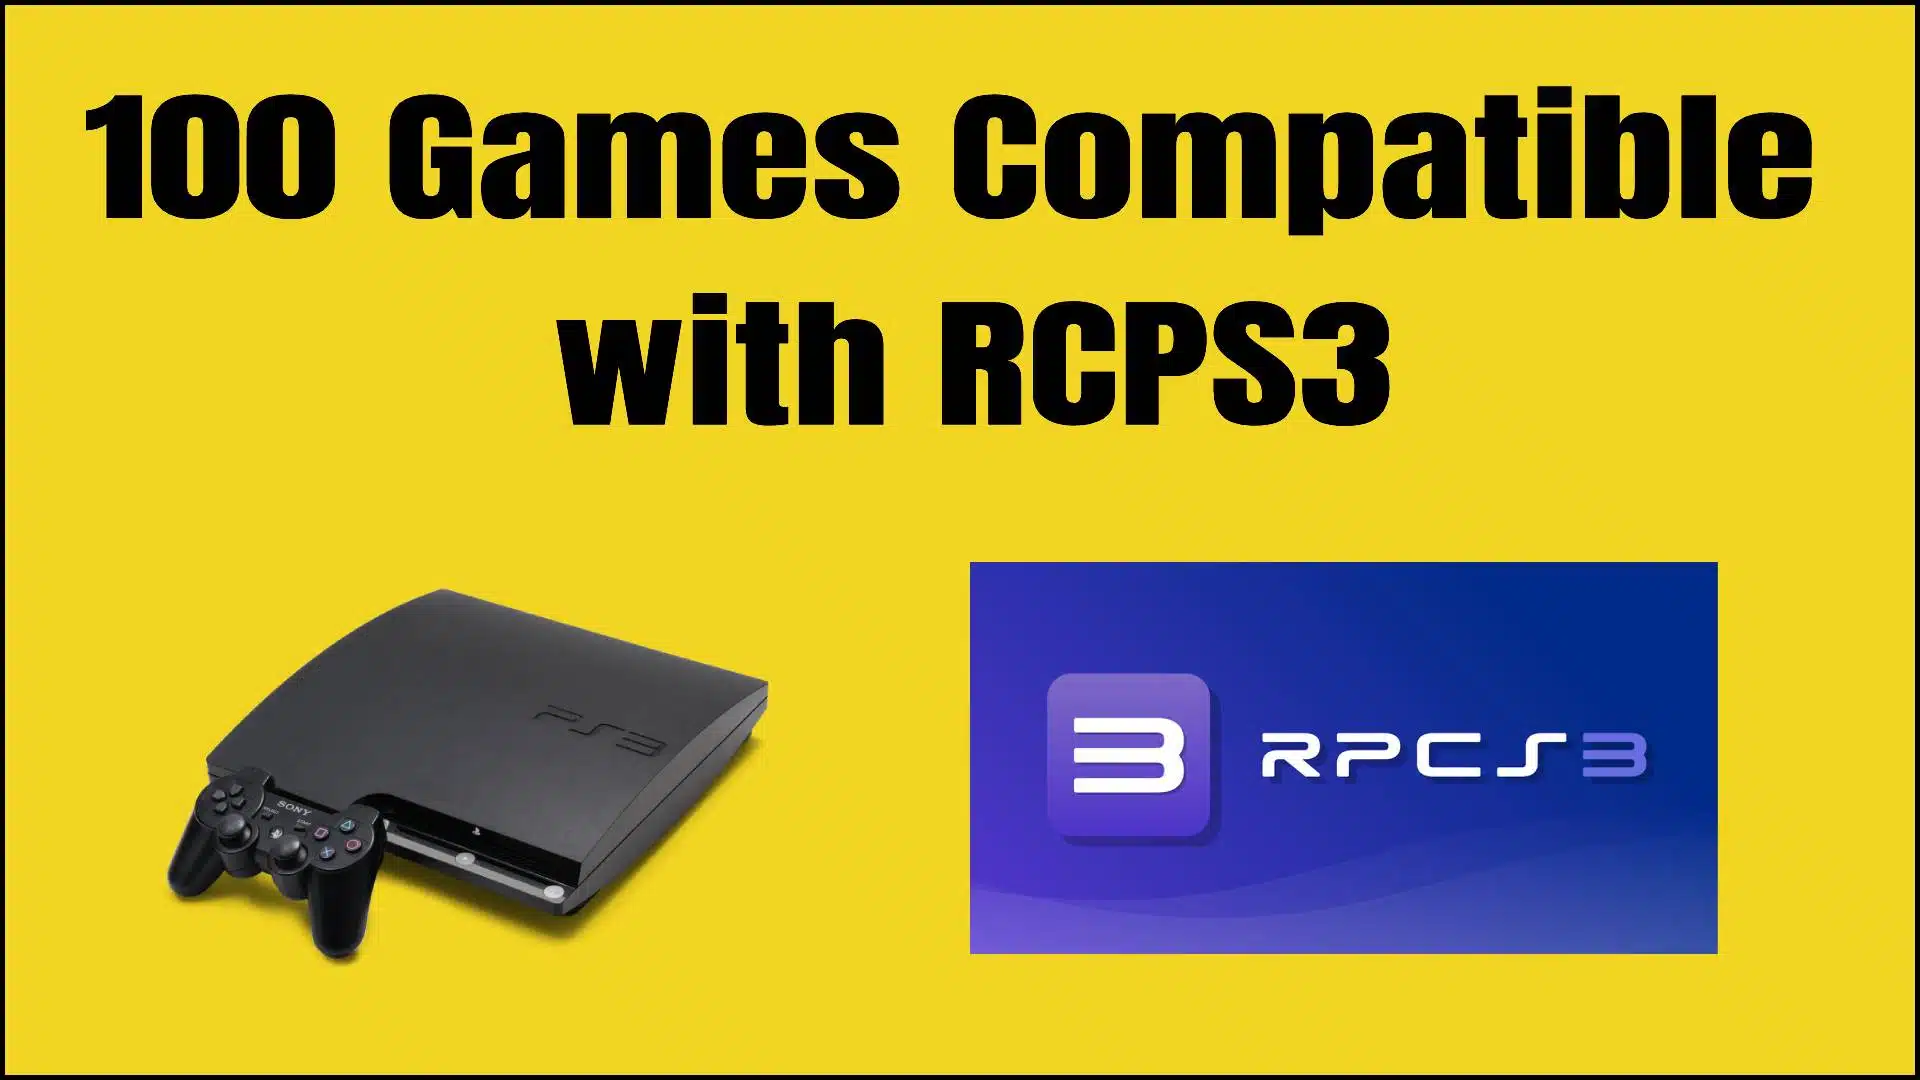 RCPS3 Compatibility List